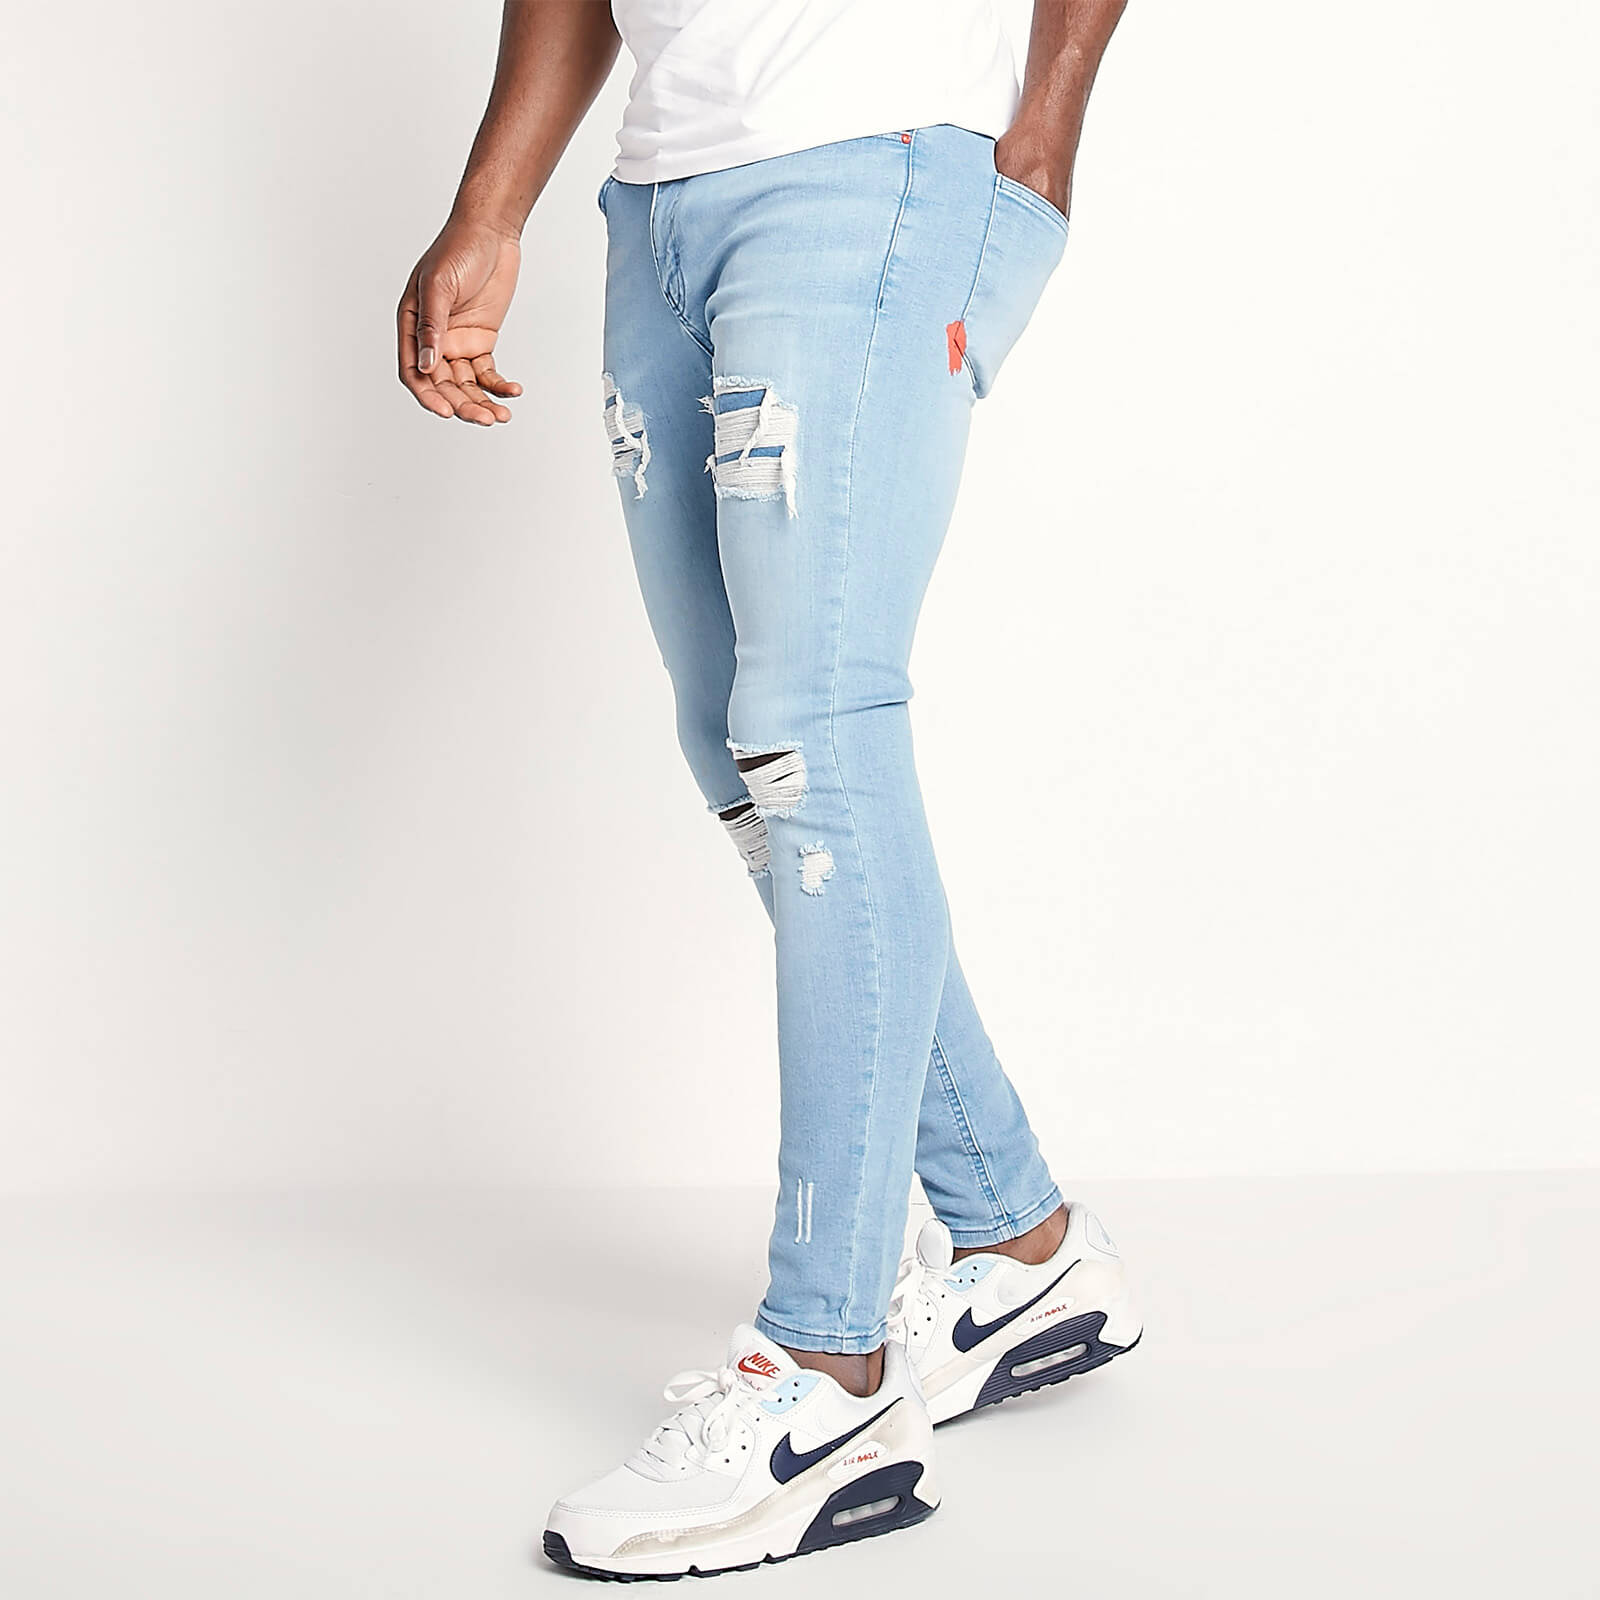 sustainable distressed jeans skinny fit – light wash - w28/l32